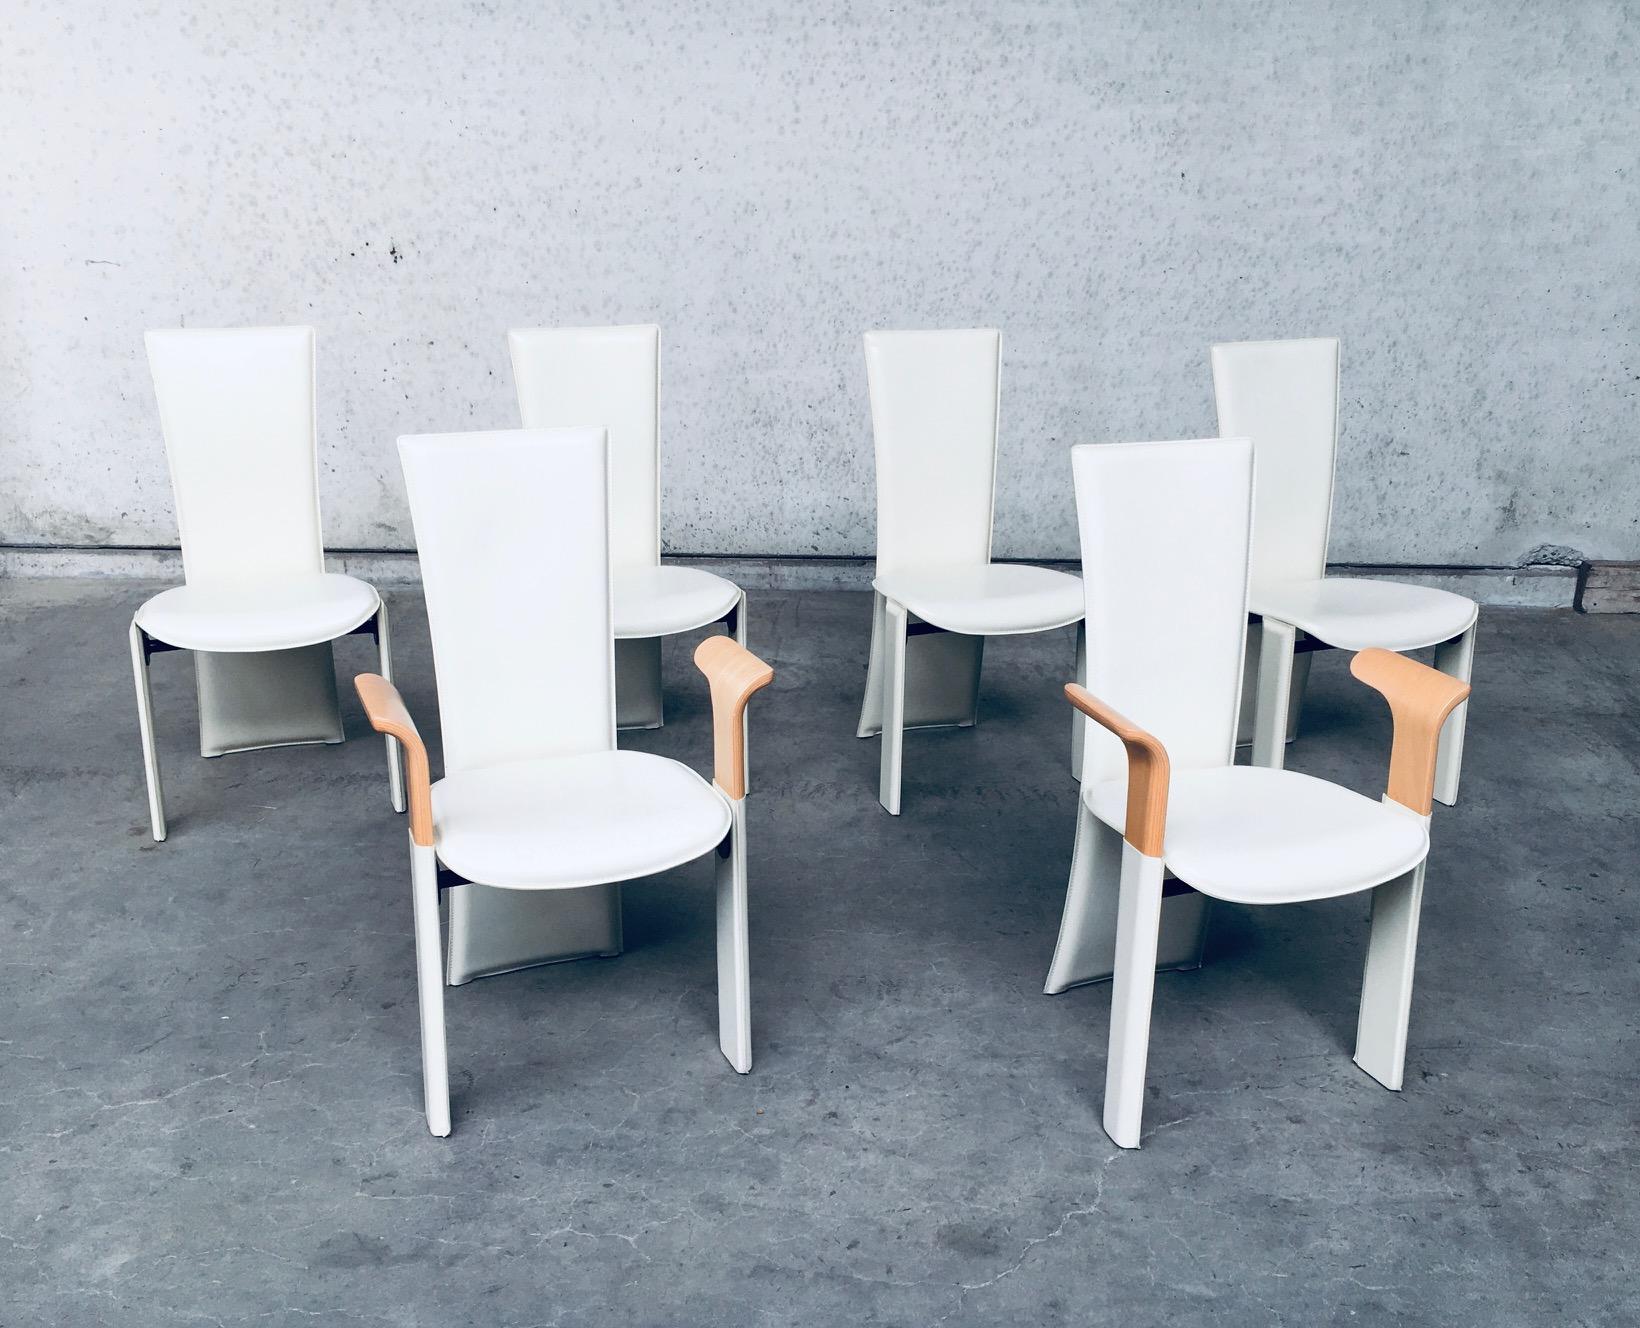 Vintage Postmodern Italian Design Dining chair set of 6 by Pietro Costantini, made in Italy in the 1980's. All leather covered high back beige dining chairs. Set comprises of 4 chairs without armrests and 2 with beech wooden armrests. Marked on the